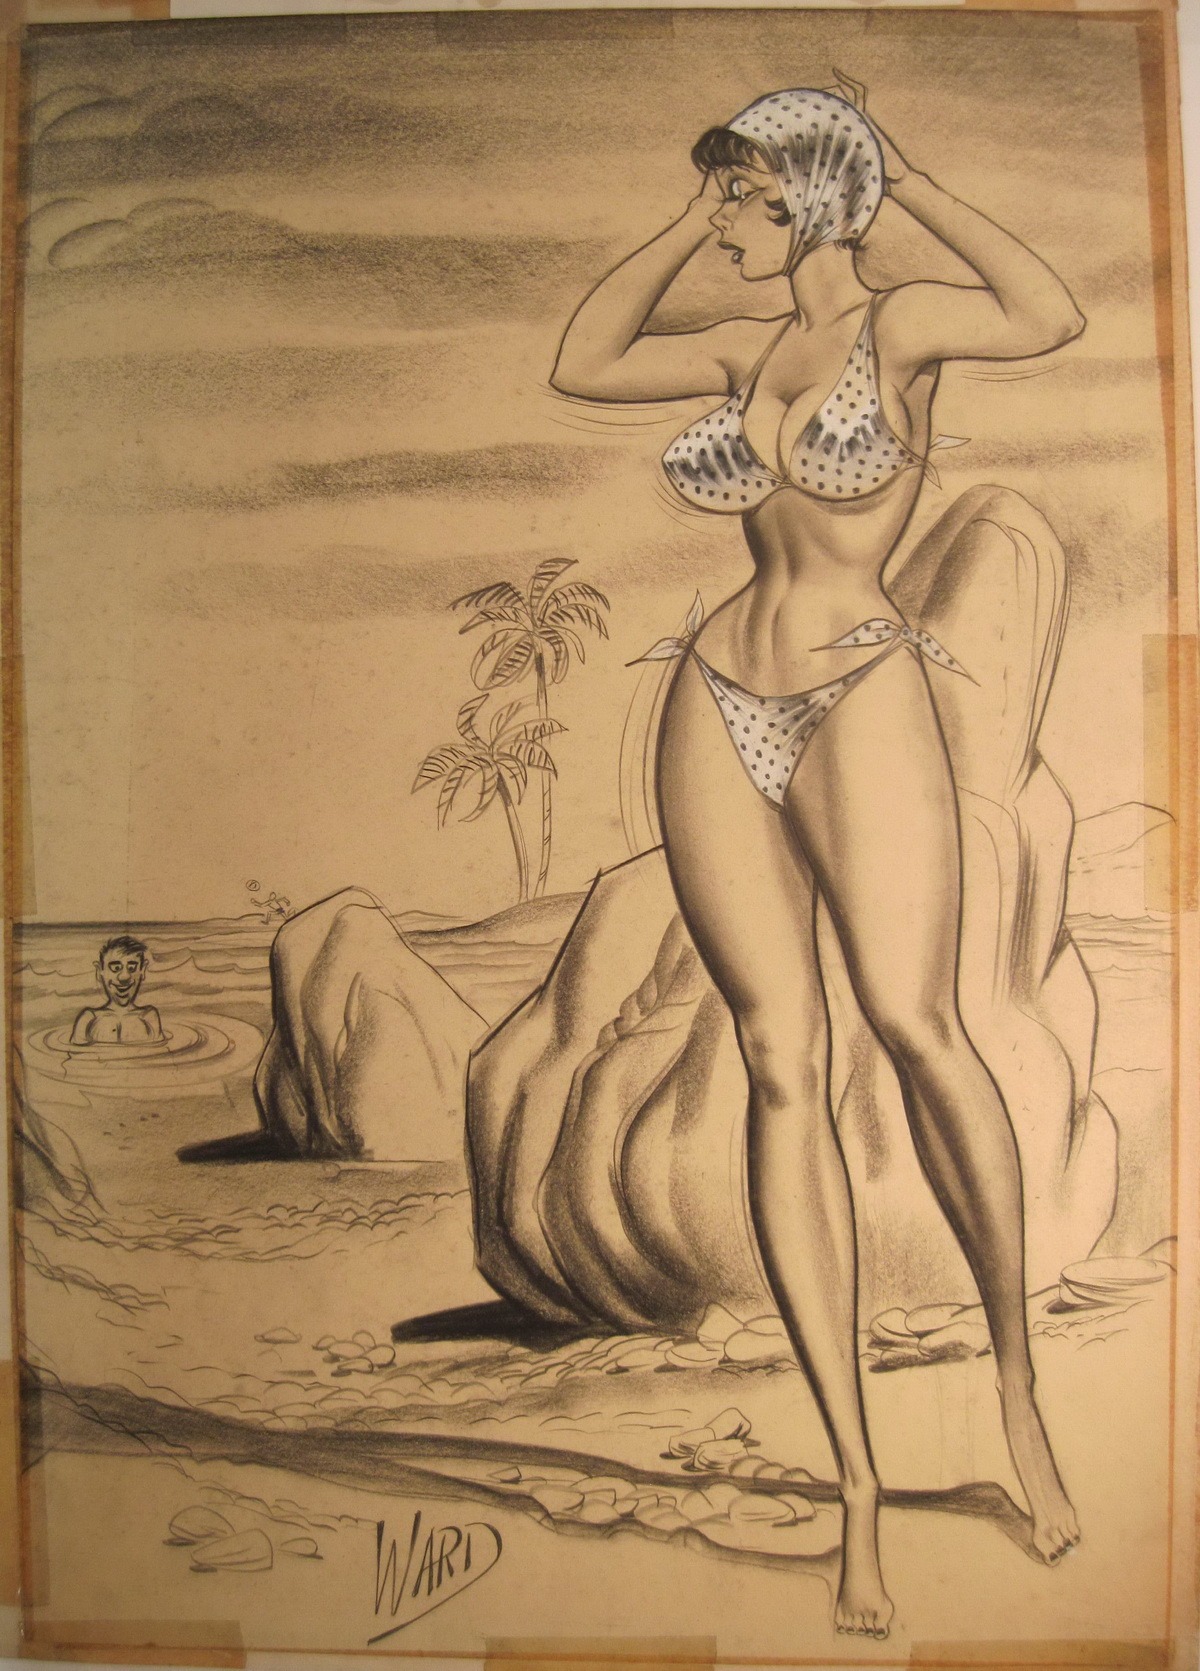 Bill Ward - comic strips, illustrations and sketches, biography |  2DGalleries